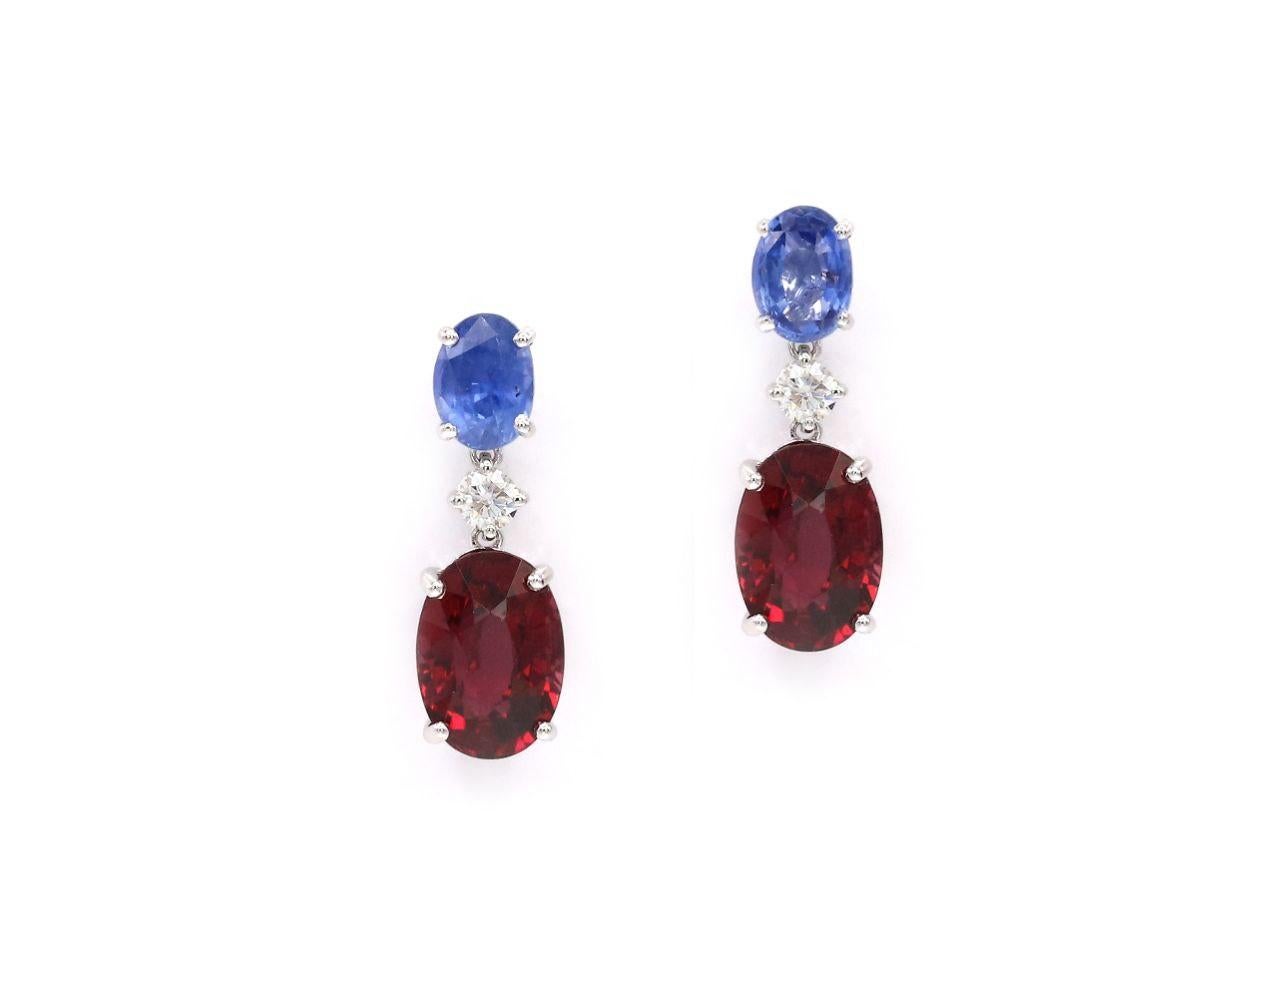 8.96 Carat Red Garnet Blue Sapphire Diamond 18K White Gold Ring and Earrings In New Condition For Sale In Montreux, VD